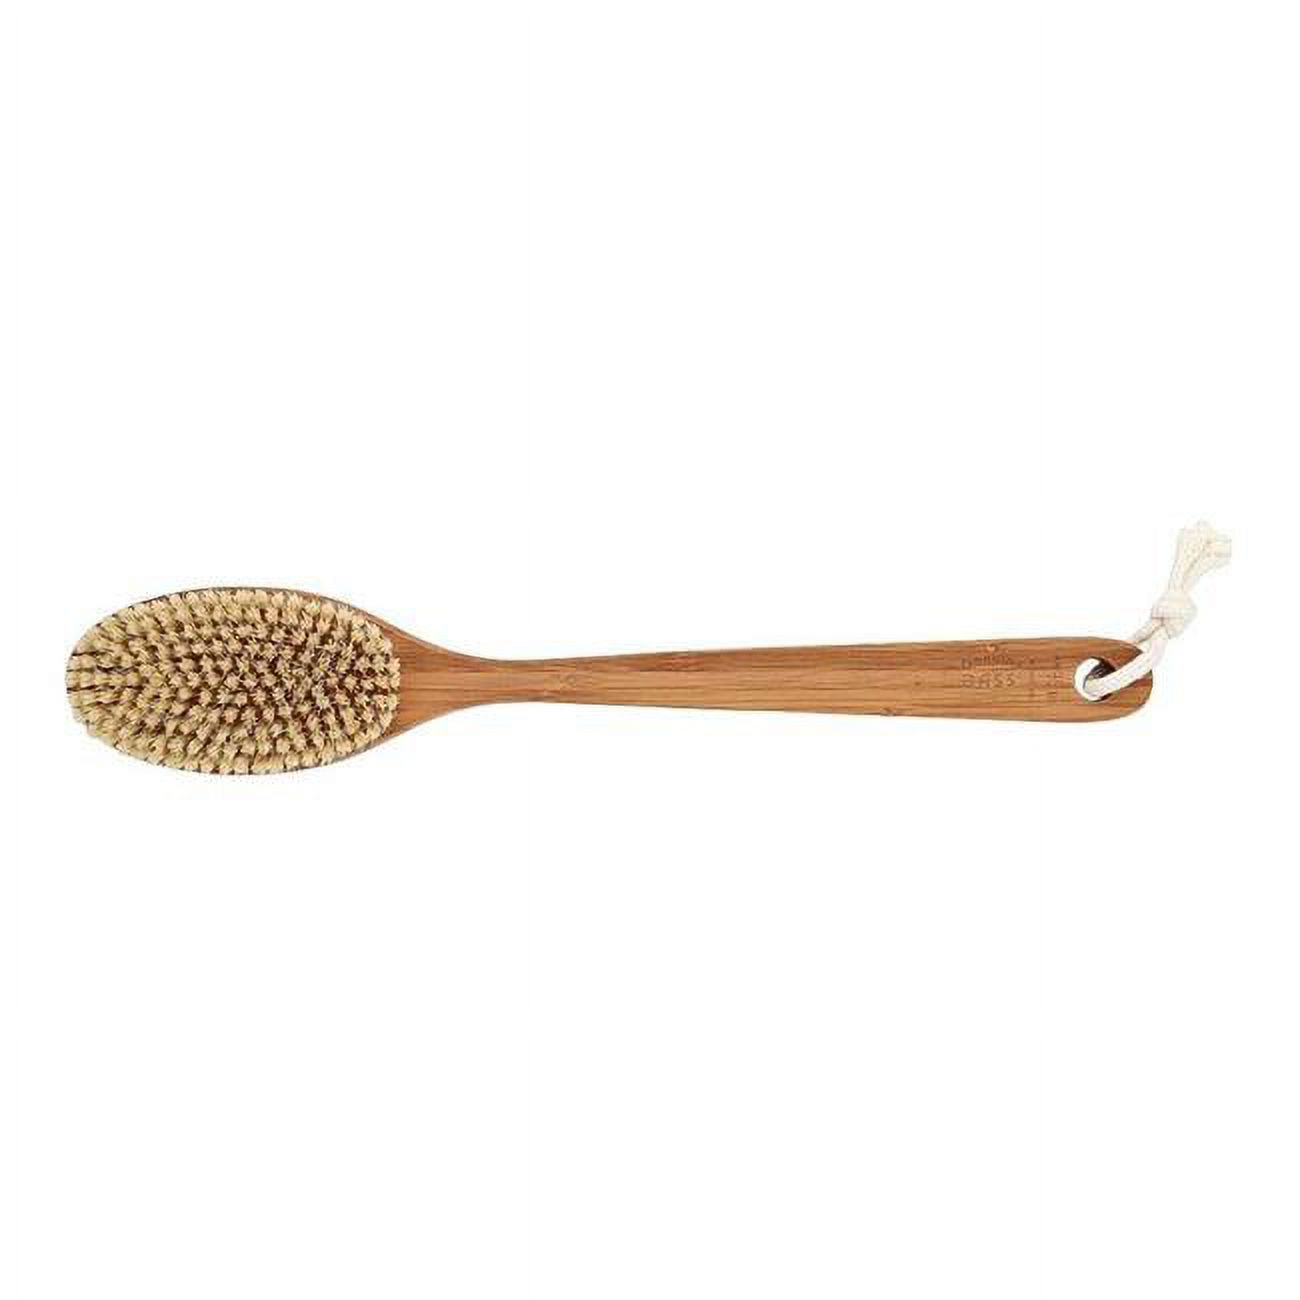 Bass Brushes Deluxe Long Handle 100% Natural Boar Firm Body Brush Wet / Dry Dark Bamboo Handle 1 Brush - image 1 of 2